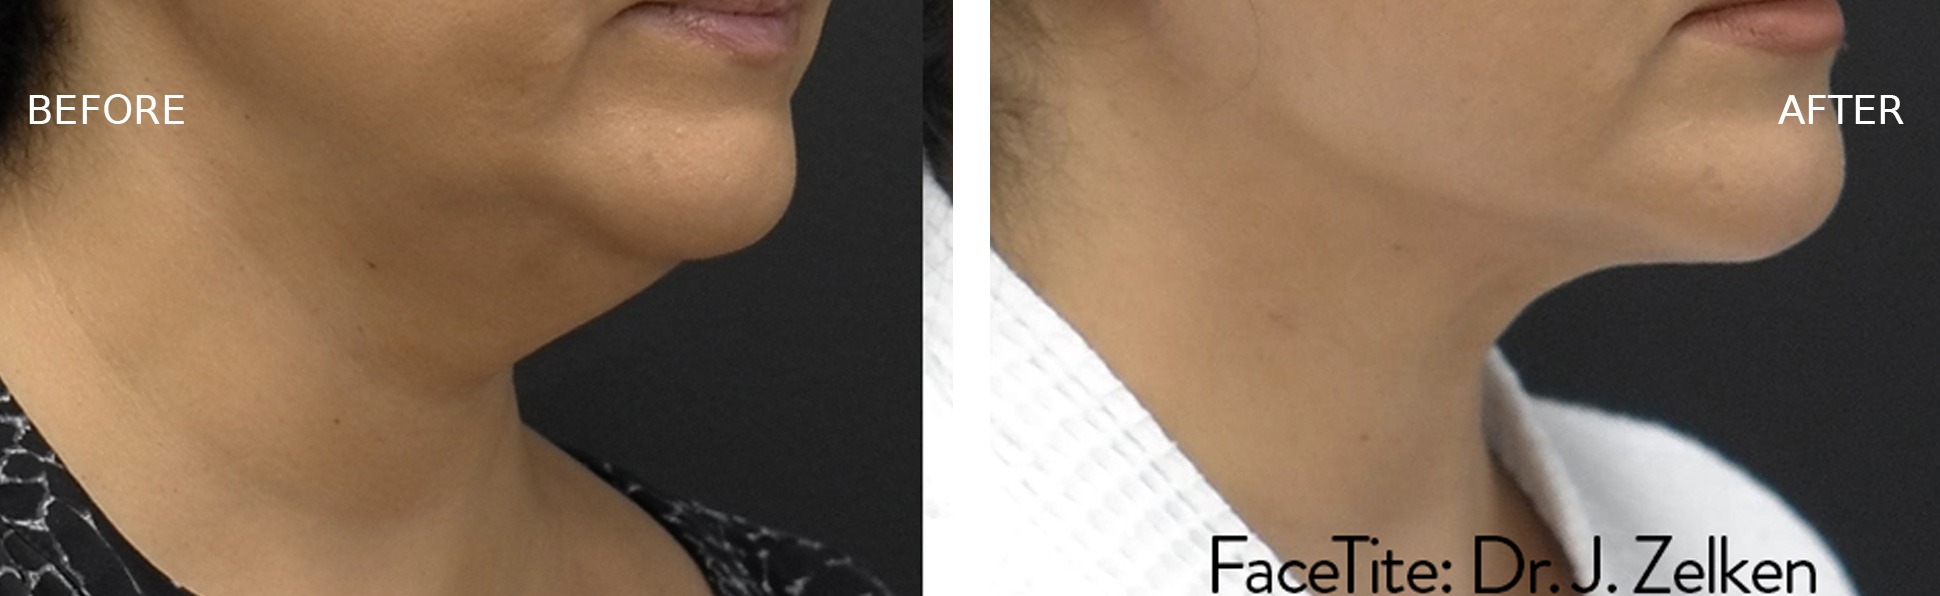 Woman's Face Before and After FaceTite